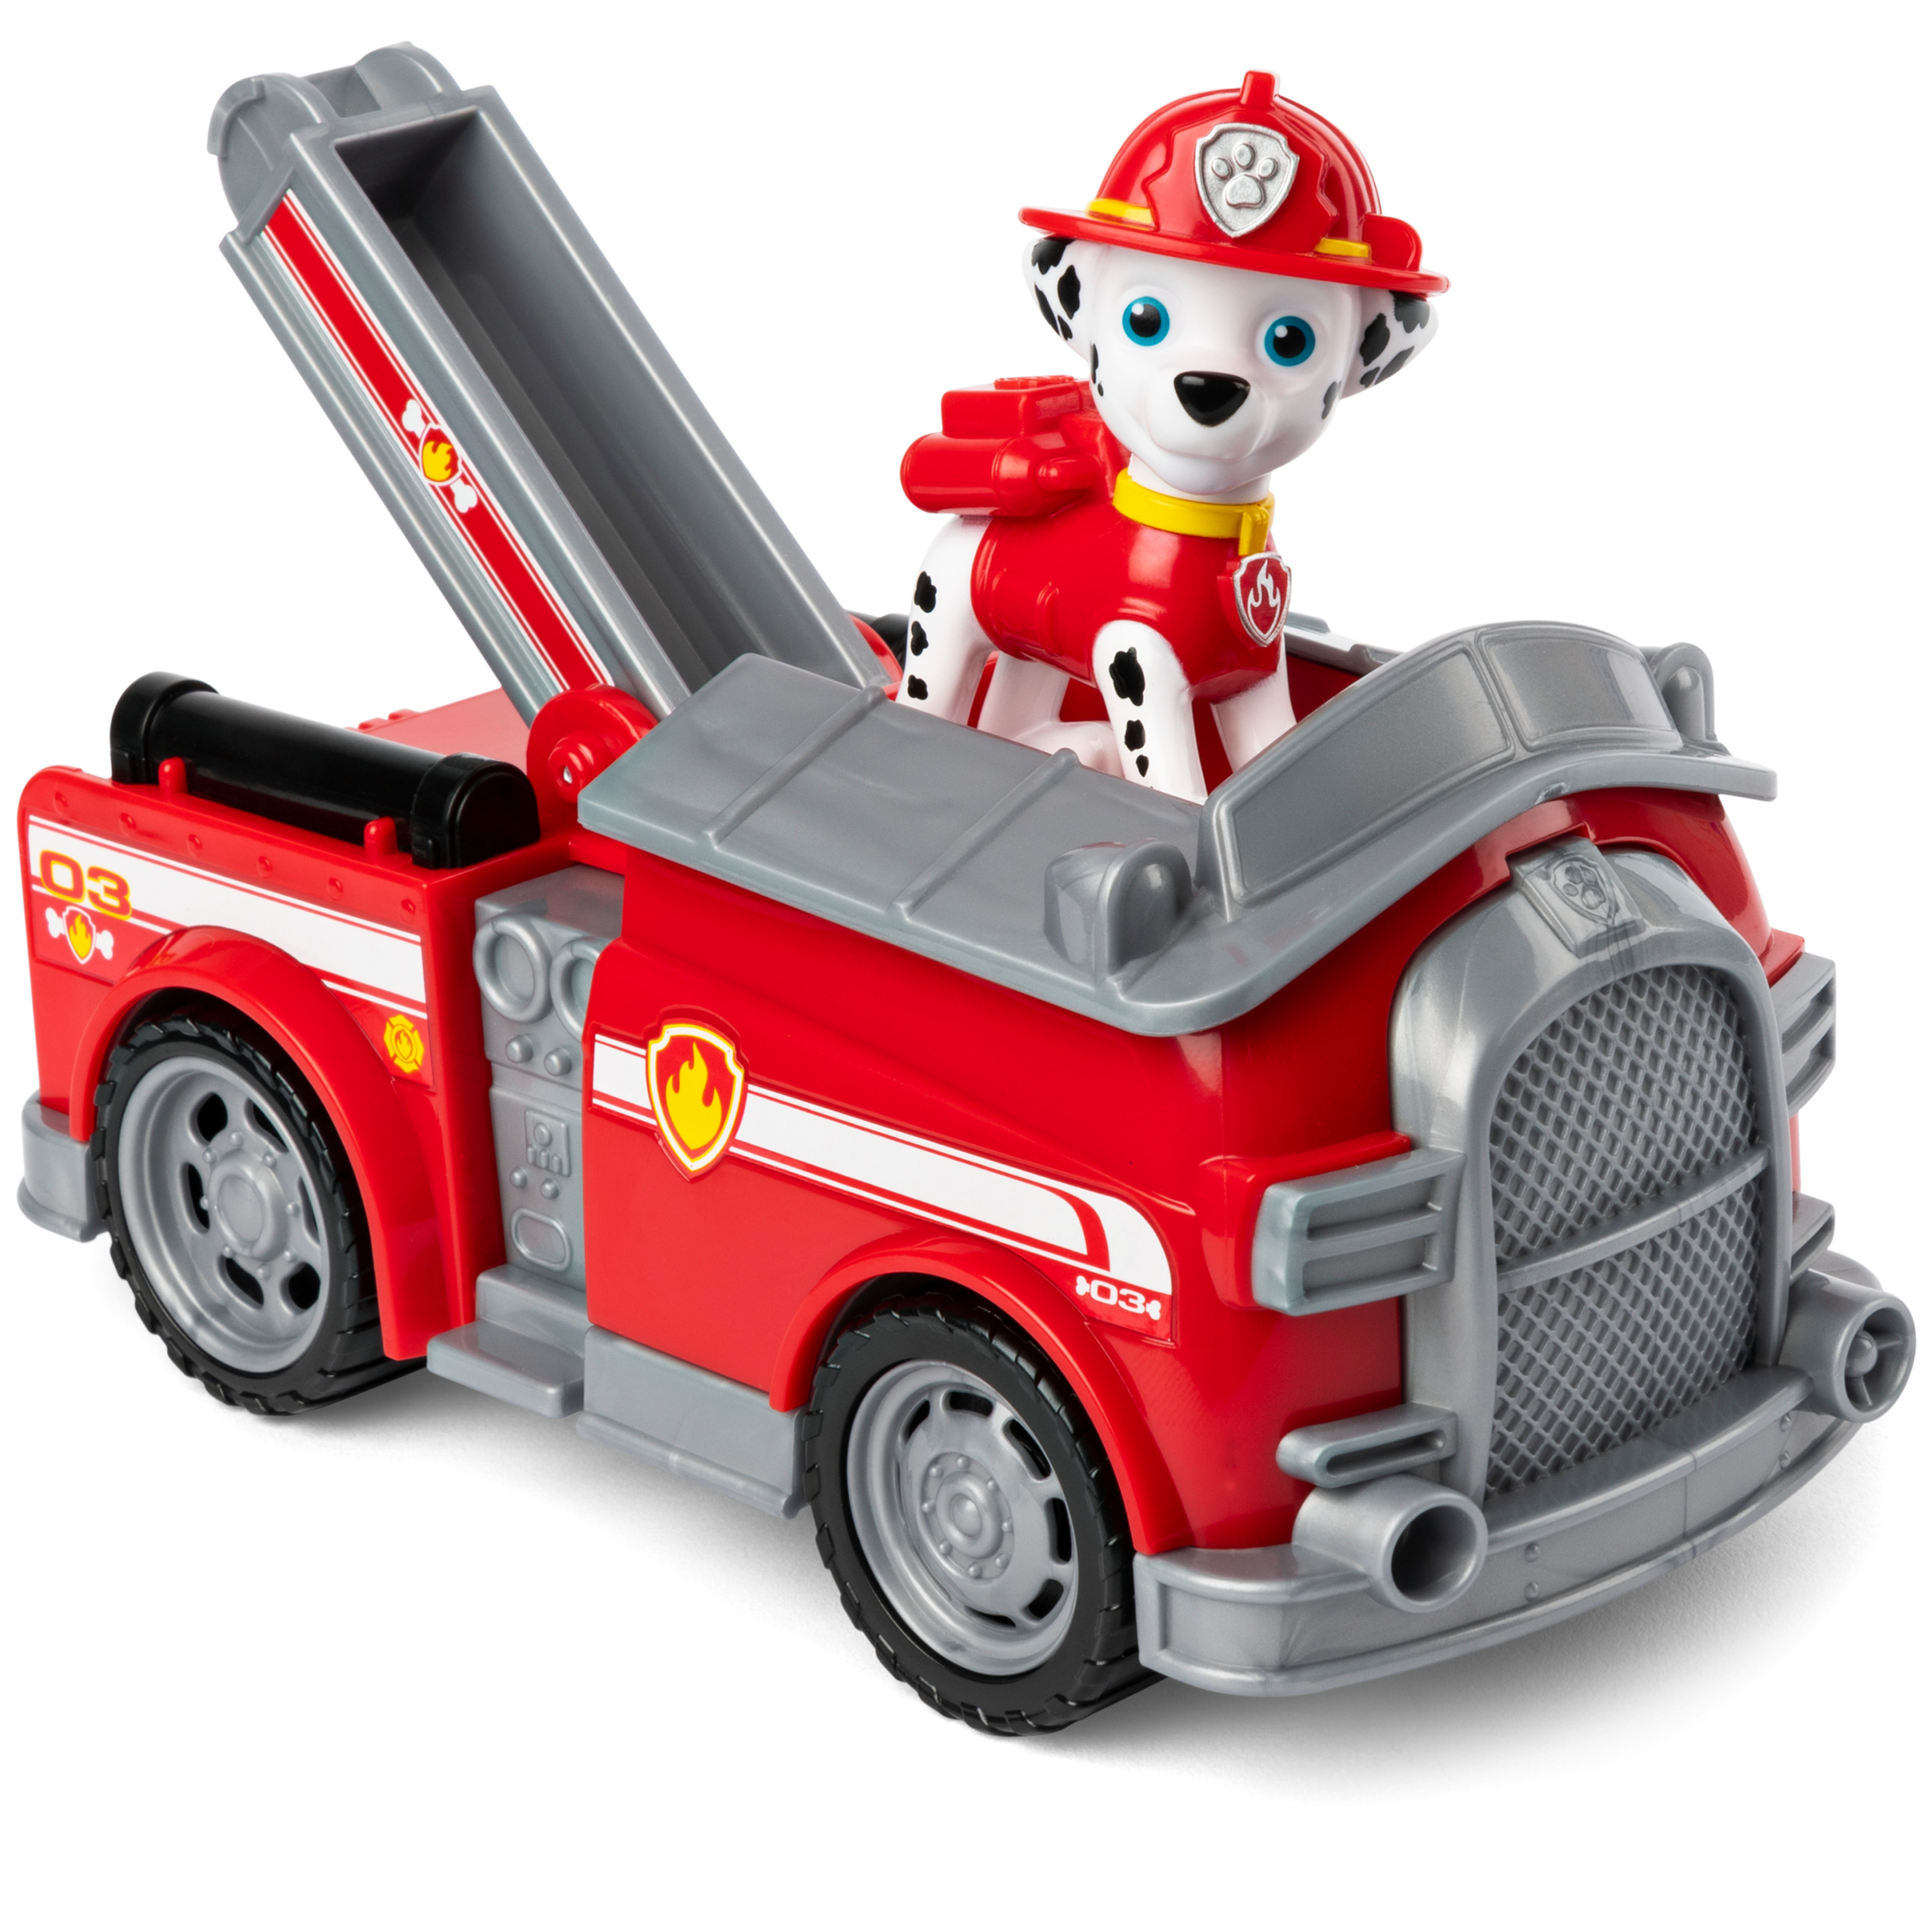 PAW Patrol, Marshall’s Fire Engine Vehicle with Collectible Figure - image 4 of 5